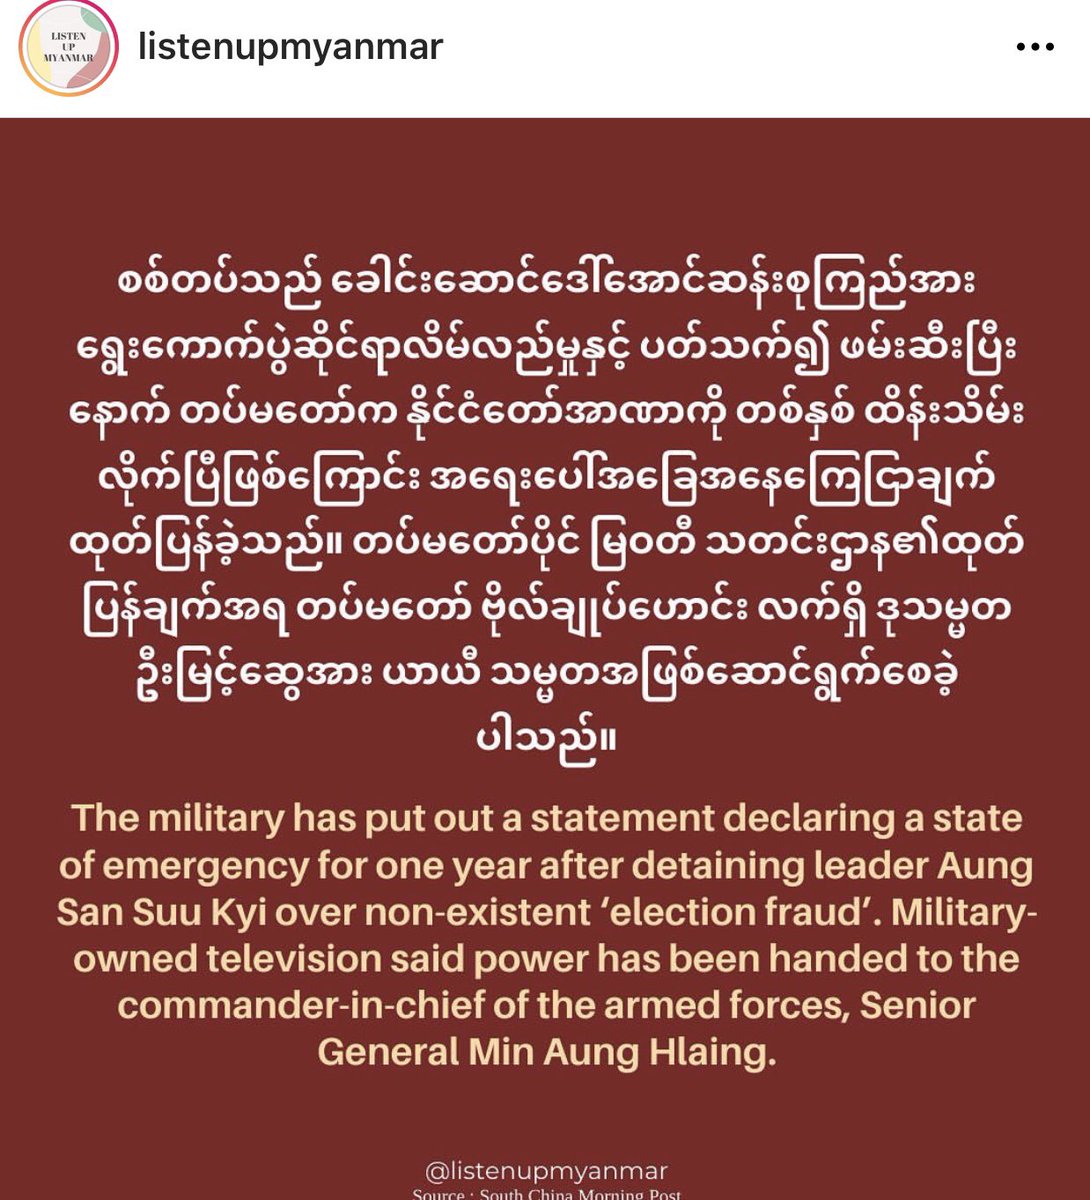 What's currently happening in Myanmar?  #saveMyanmar pls aware this situation.  https://www.instagram.com/p/CKvE0nMFTmD/?igshid=rz3x16716pqy